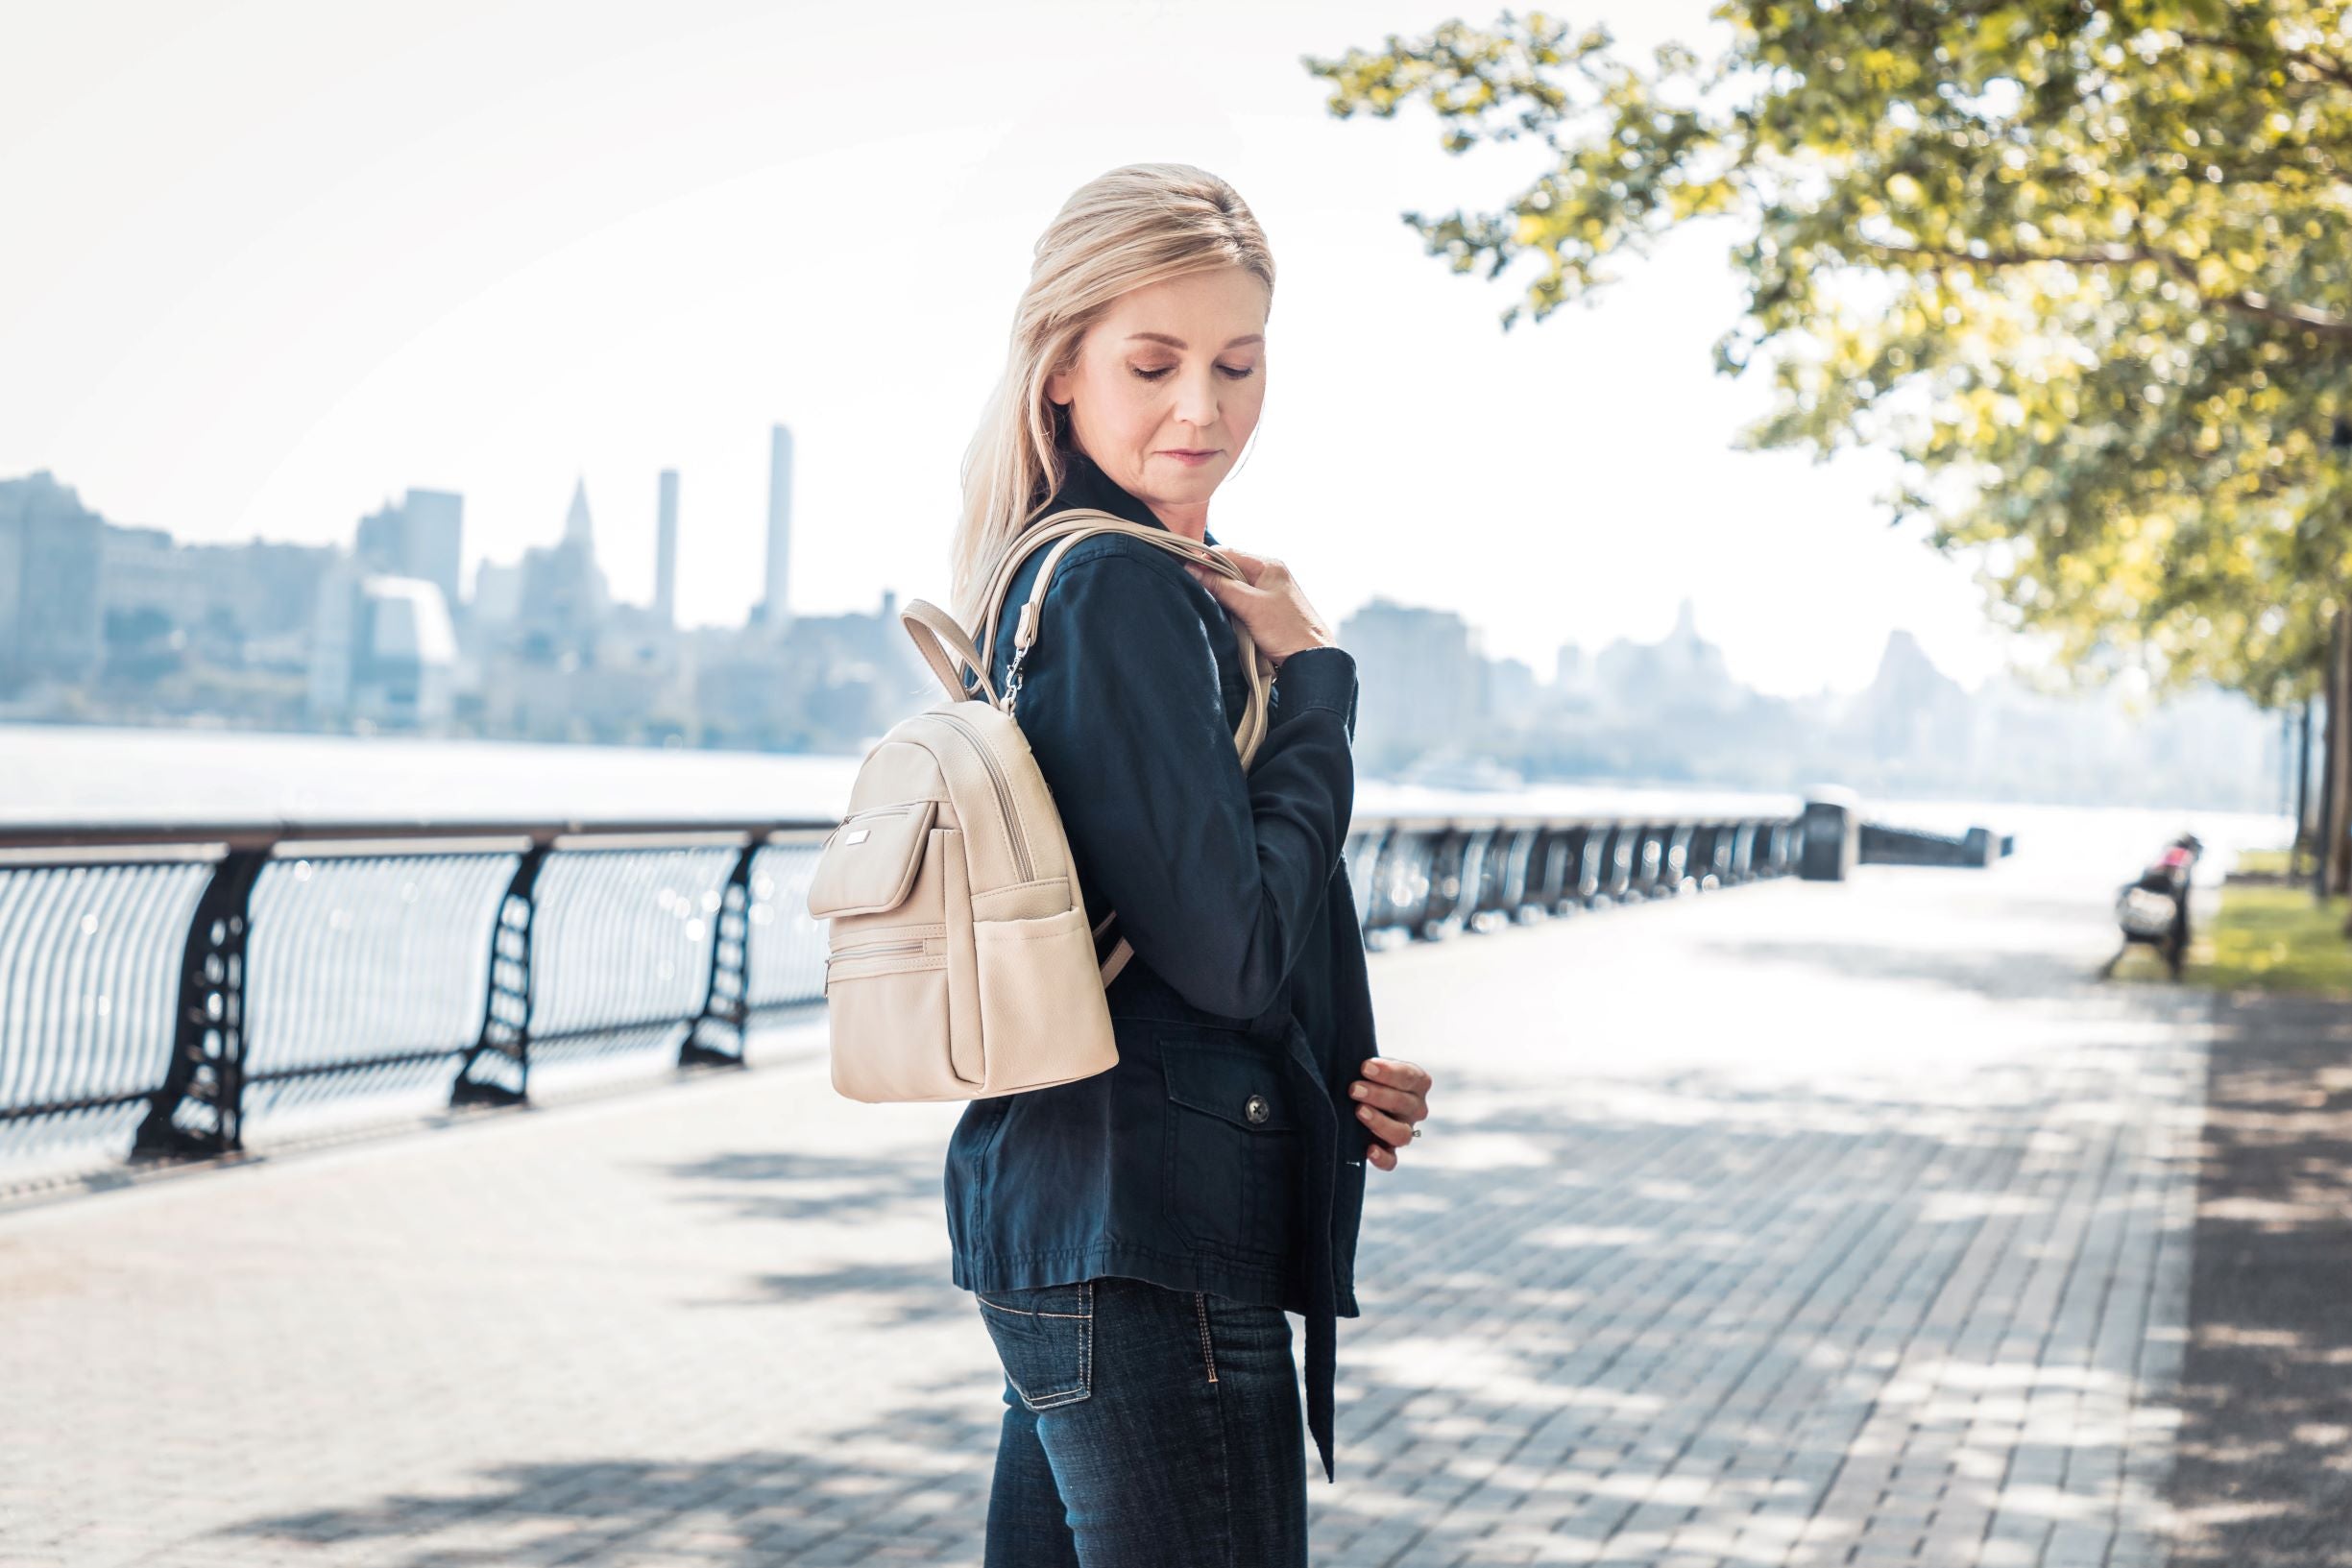 Travel With the Ultimate Convertible Backpacks – MultiSac Handbags